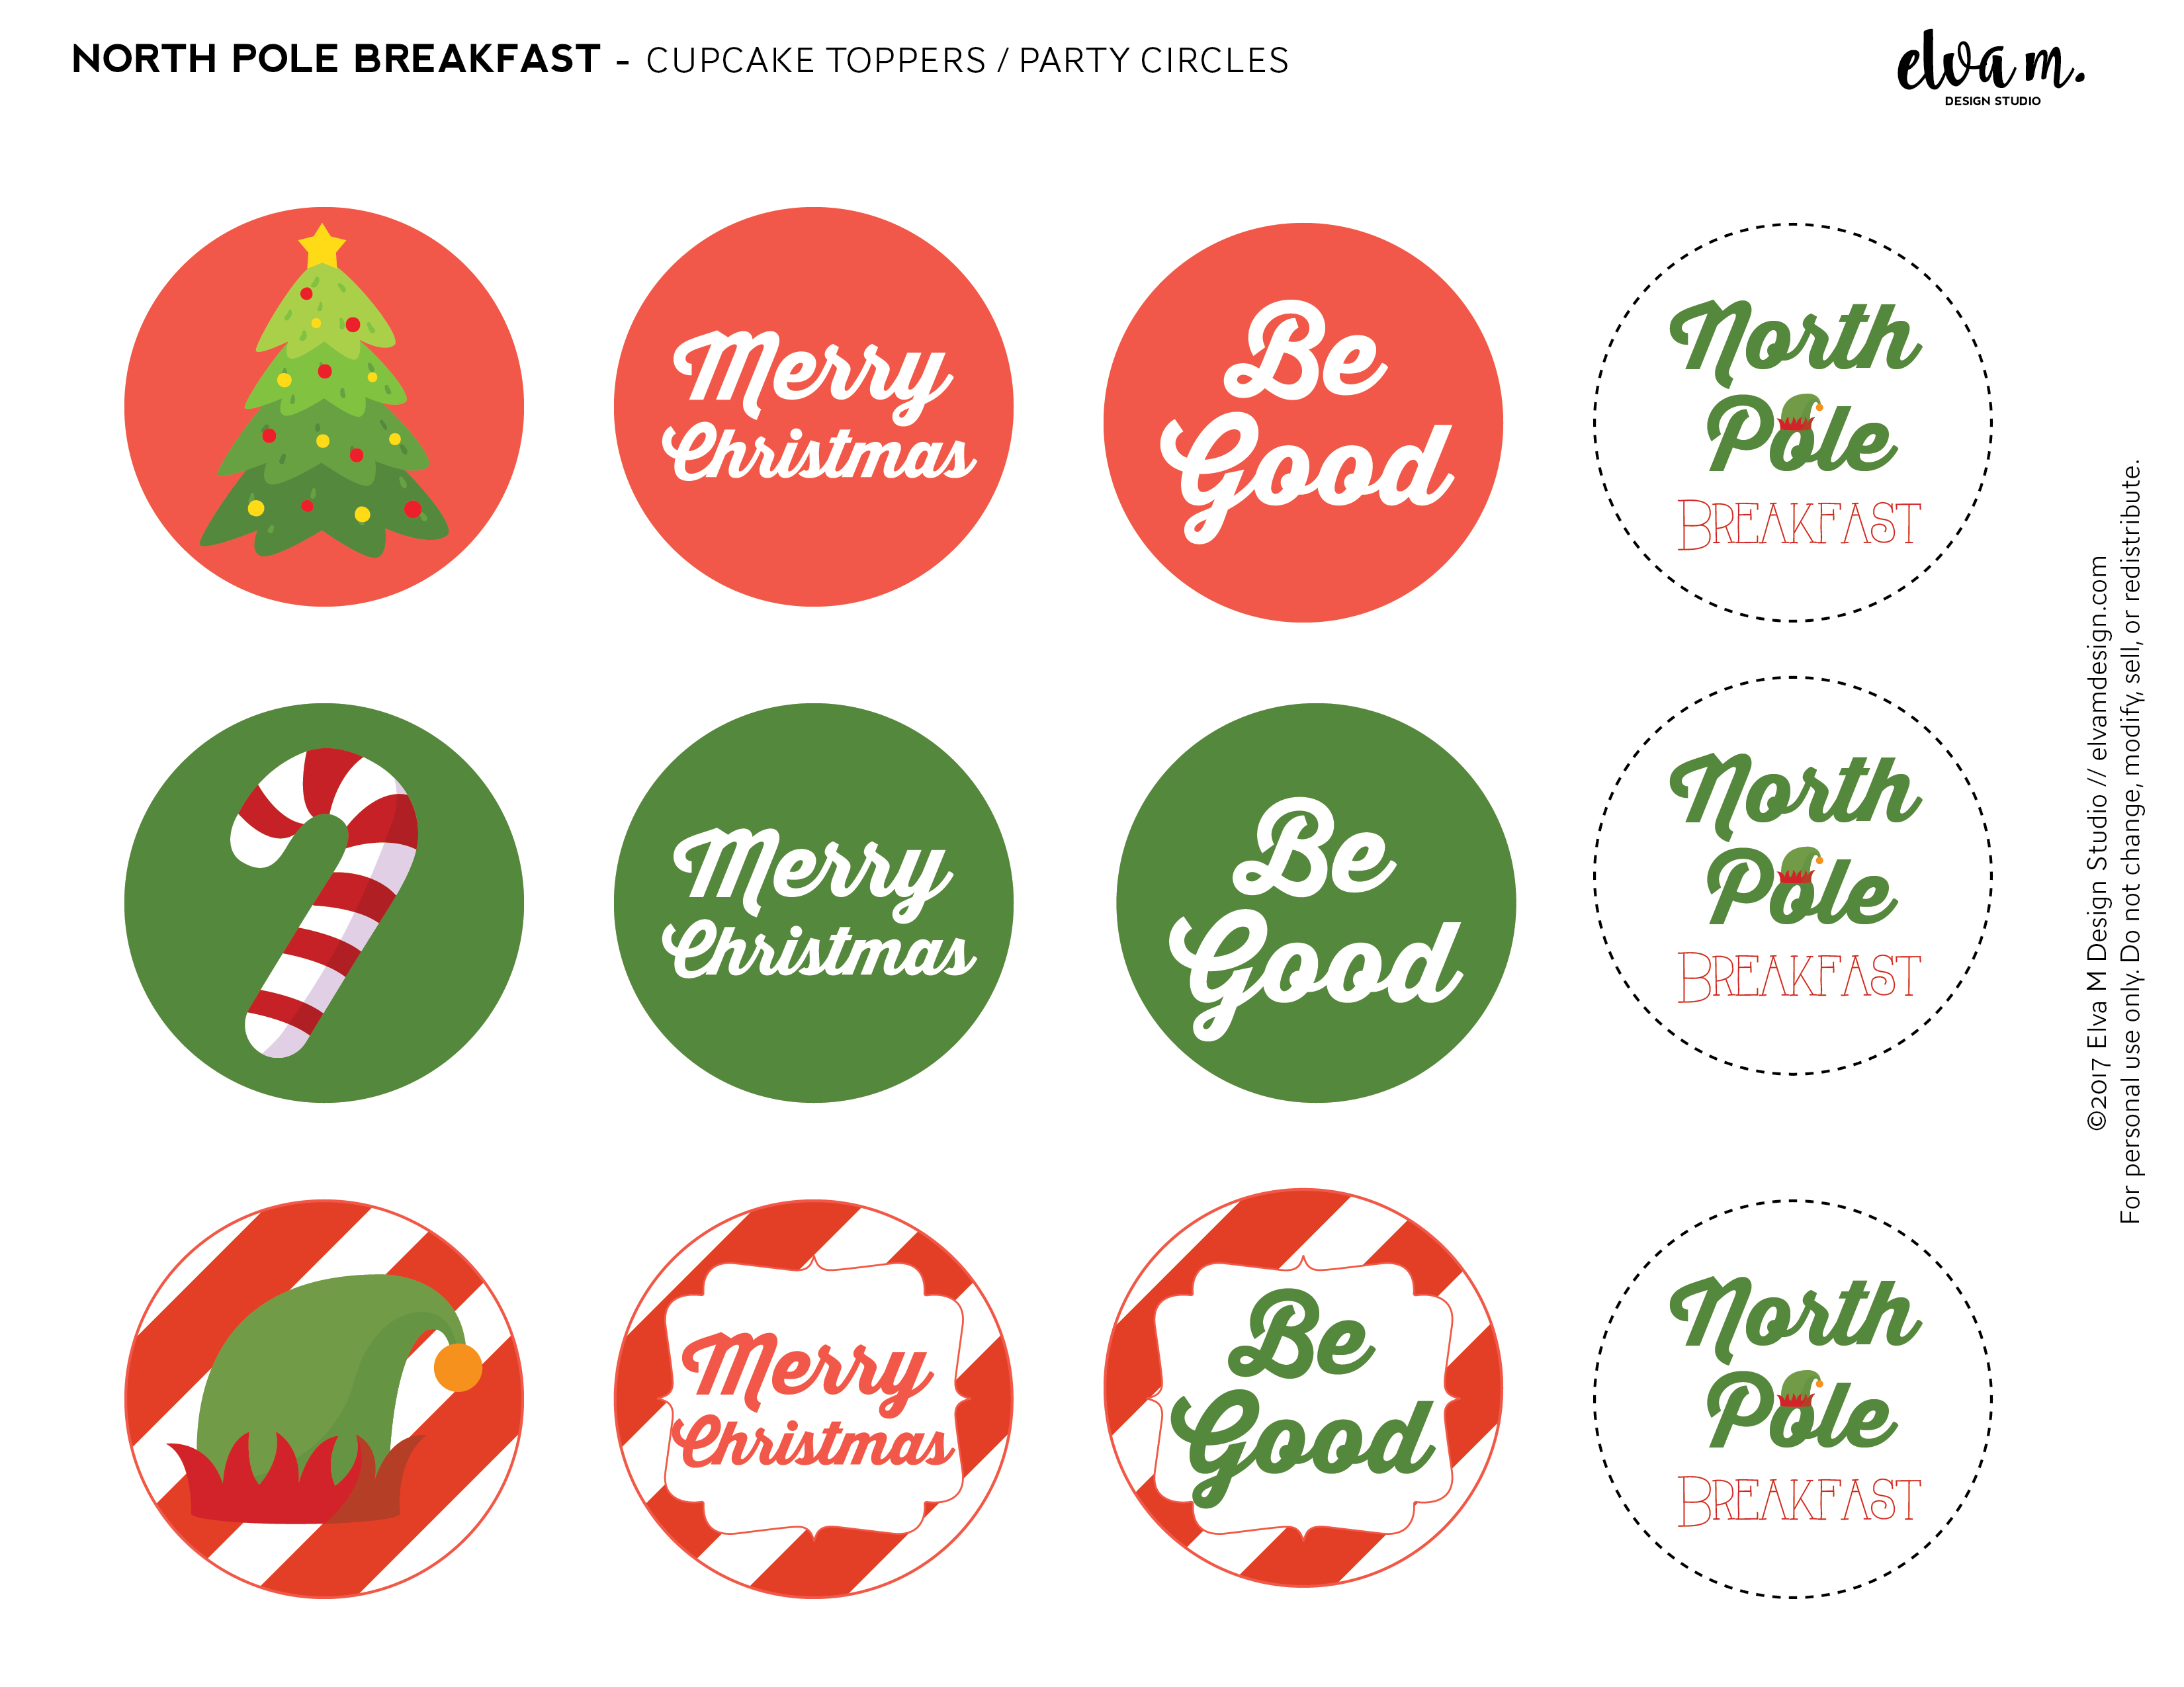 download-these-free-elf-on-the-shelf-north-pole-breakfast-printables